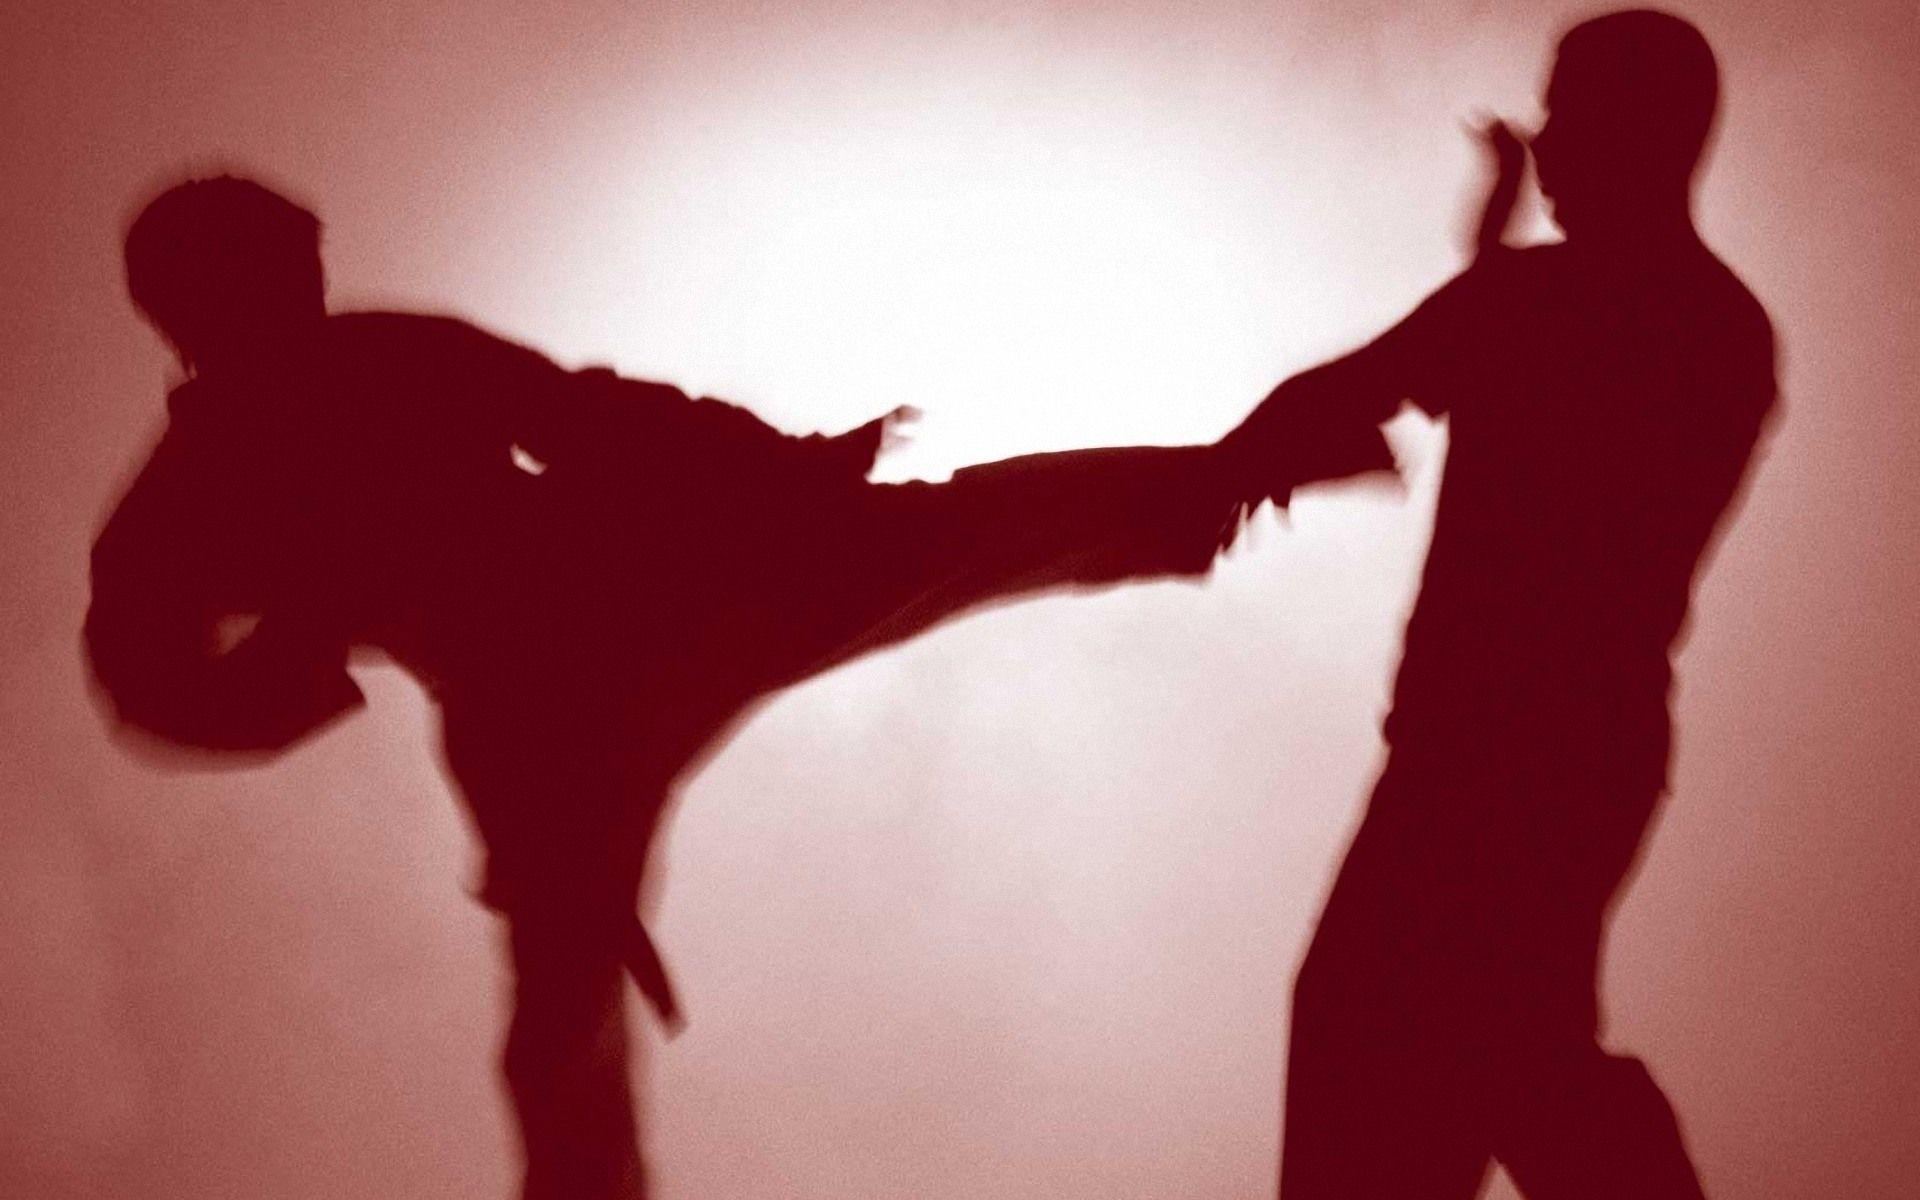 silhouette photo of men doing karate The sky Sport Battle Wallpaper  Shadows Blow Fighters The fight Silhouette Mar  Martial arts Karate  Silhouette photos